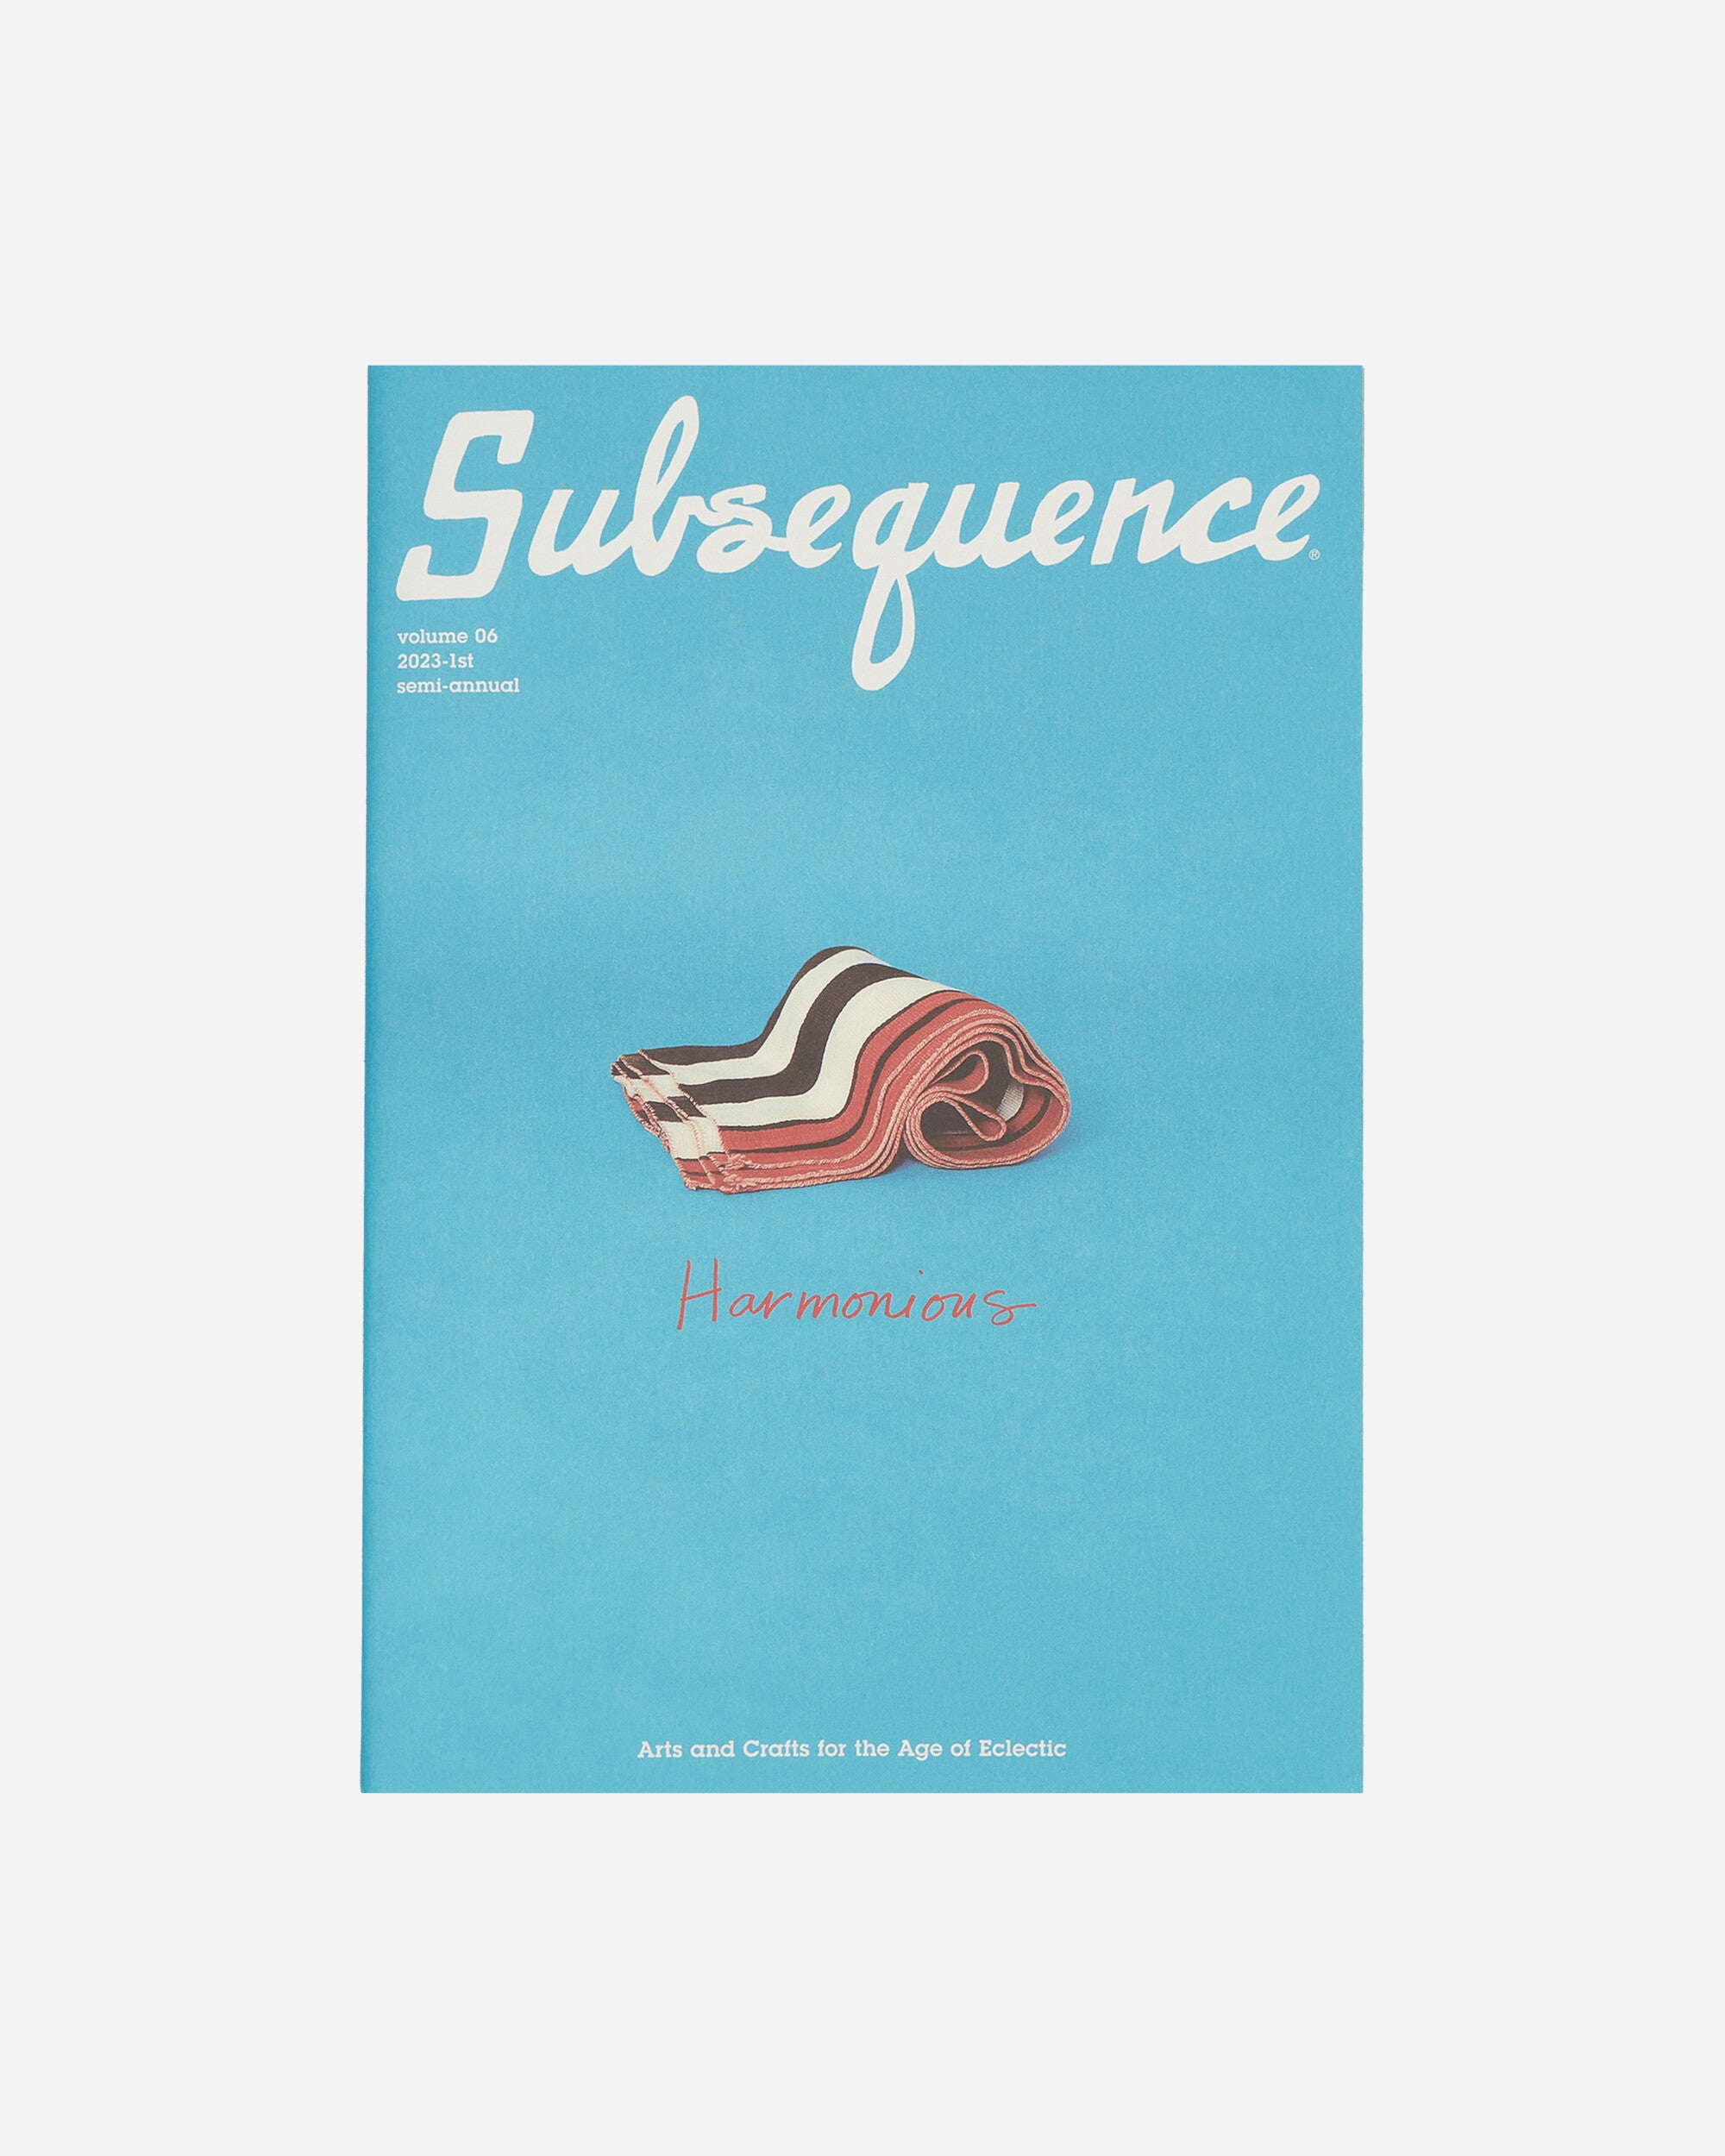 Subsequence Vol. 6